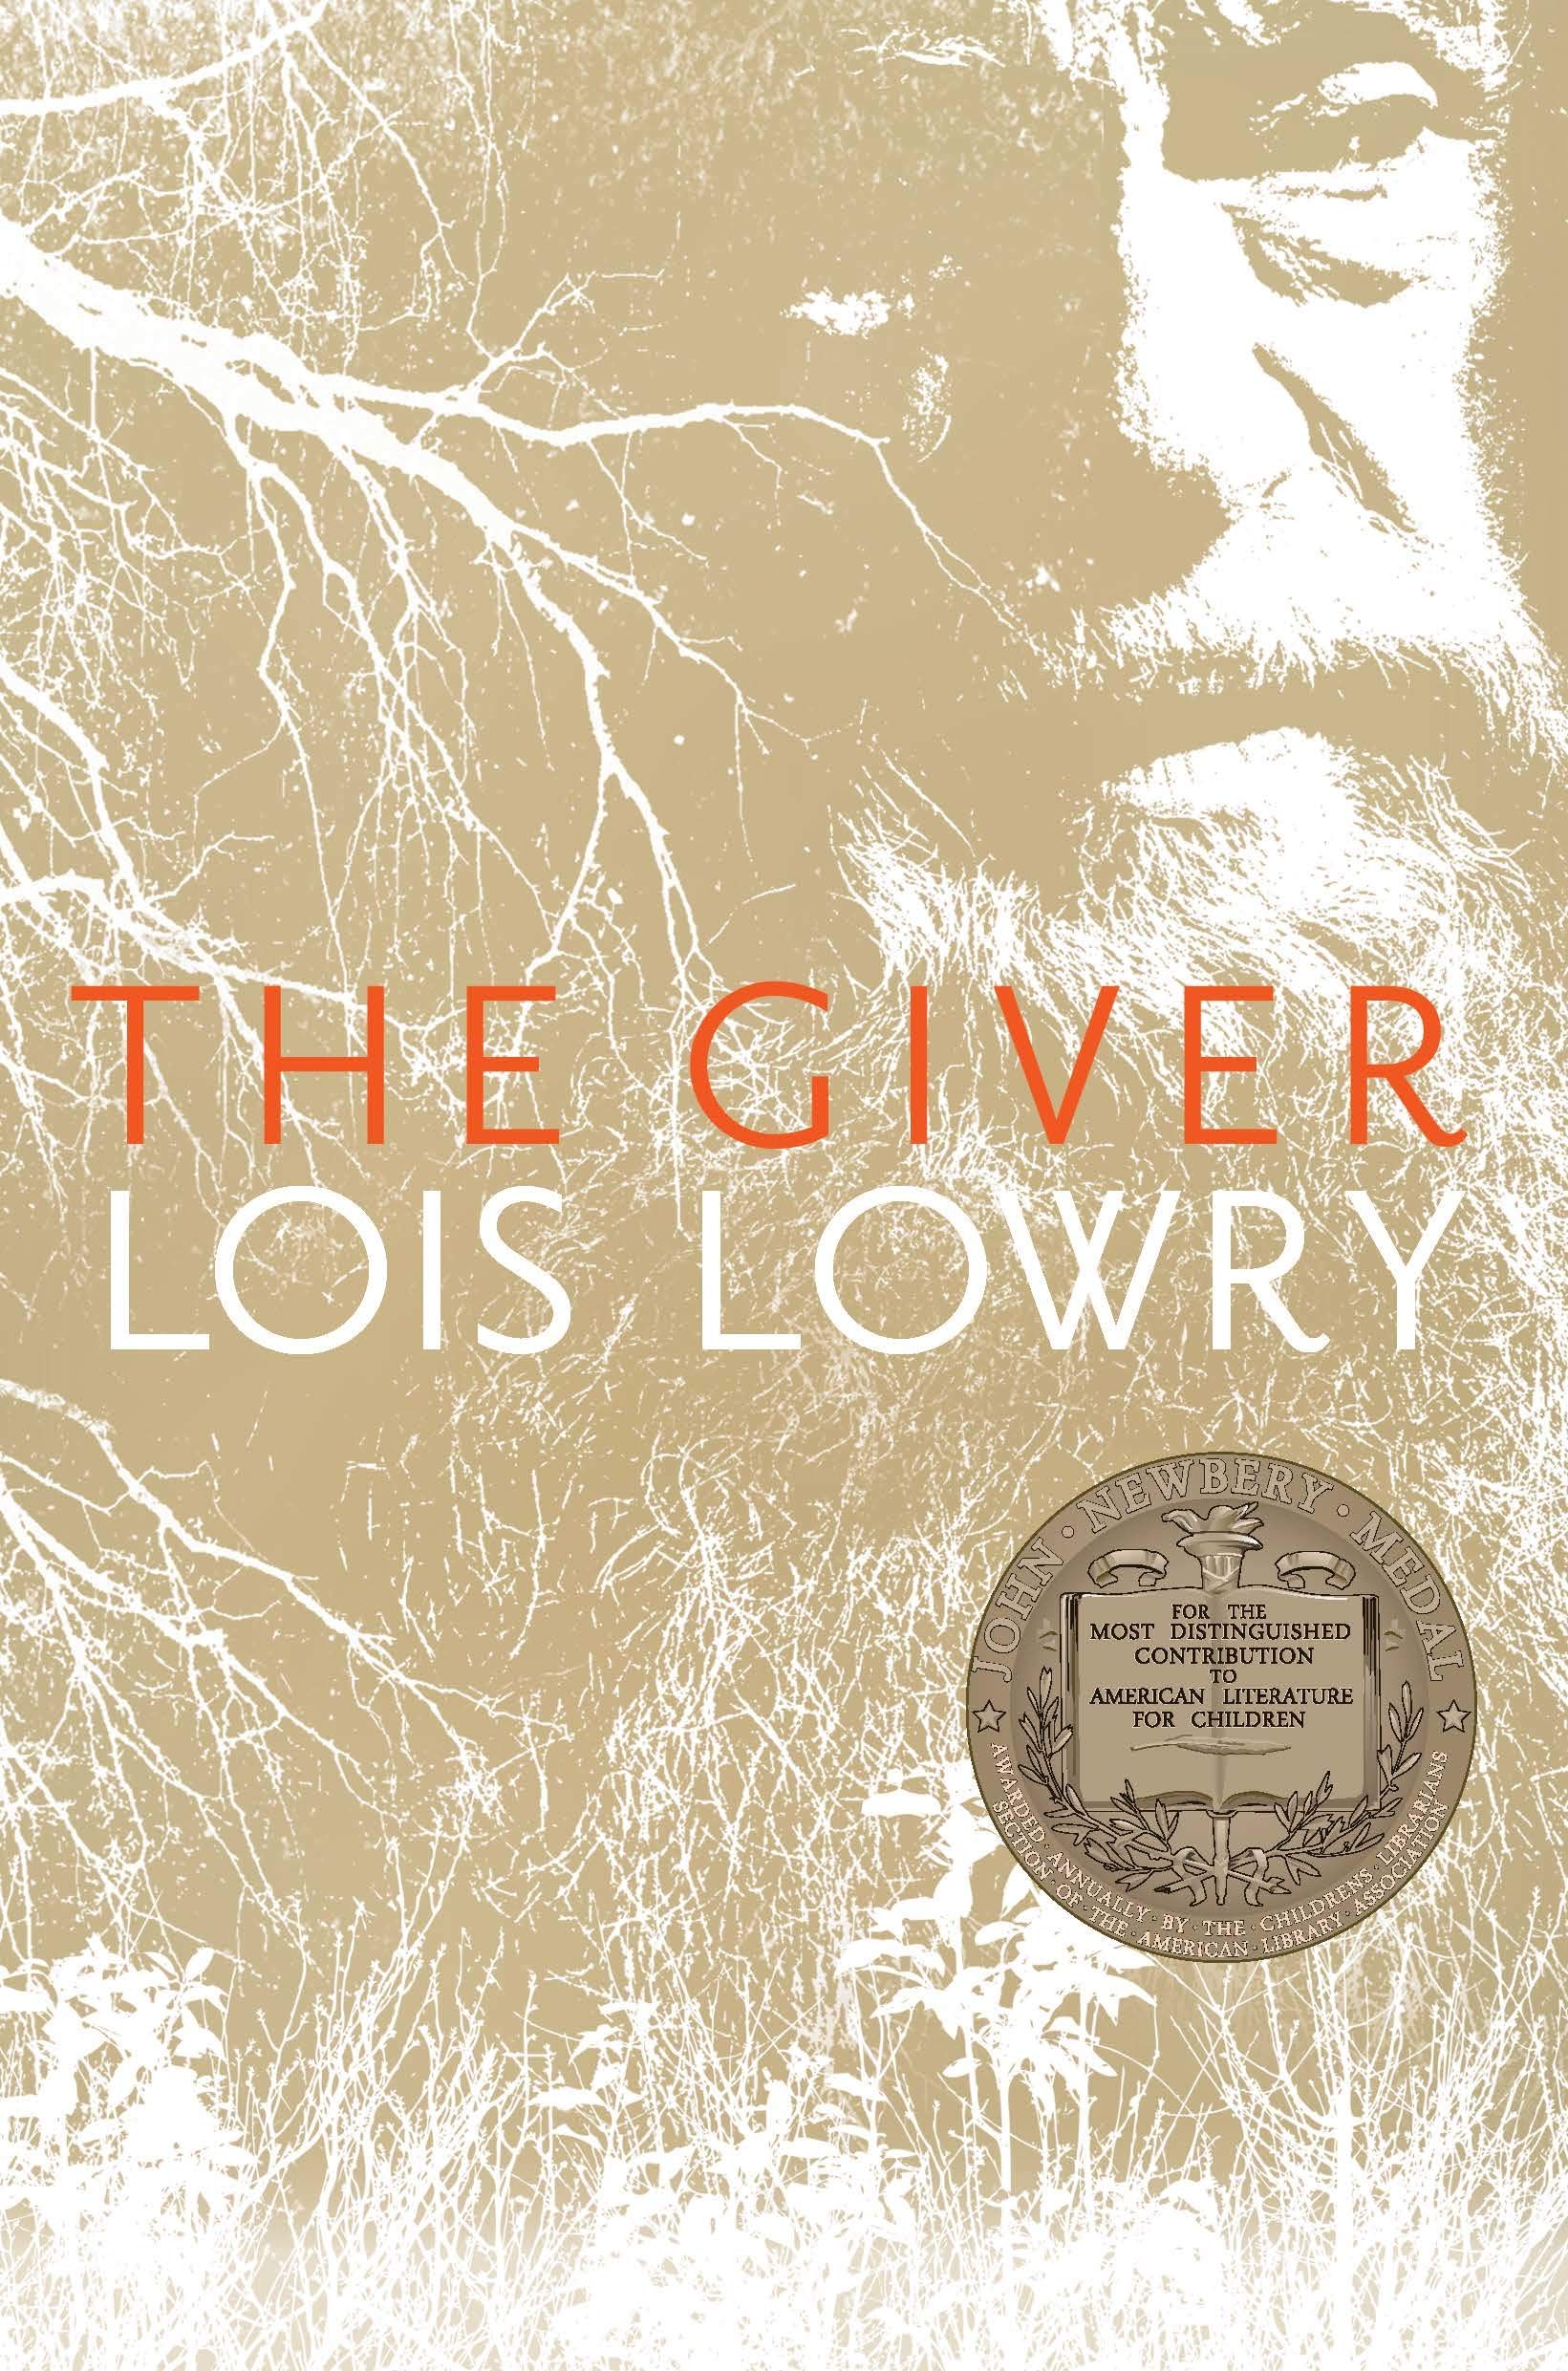 Cover image for "The Giver"